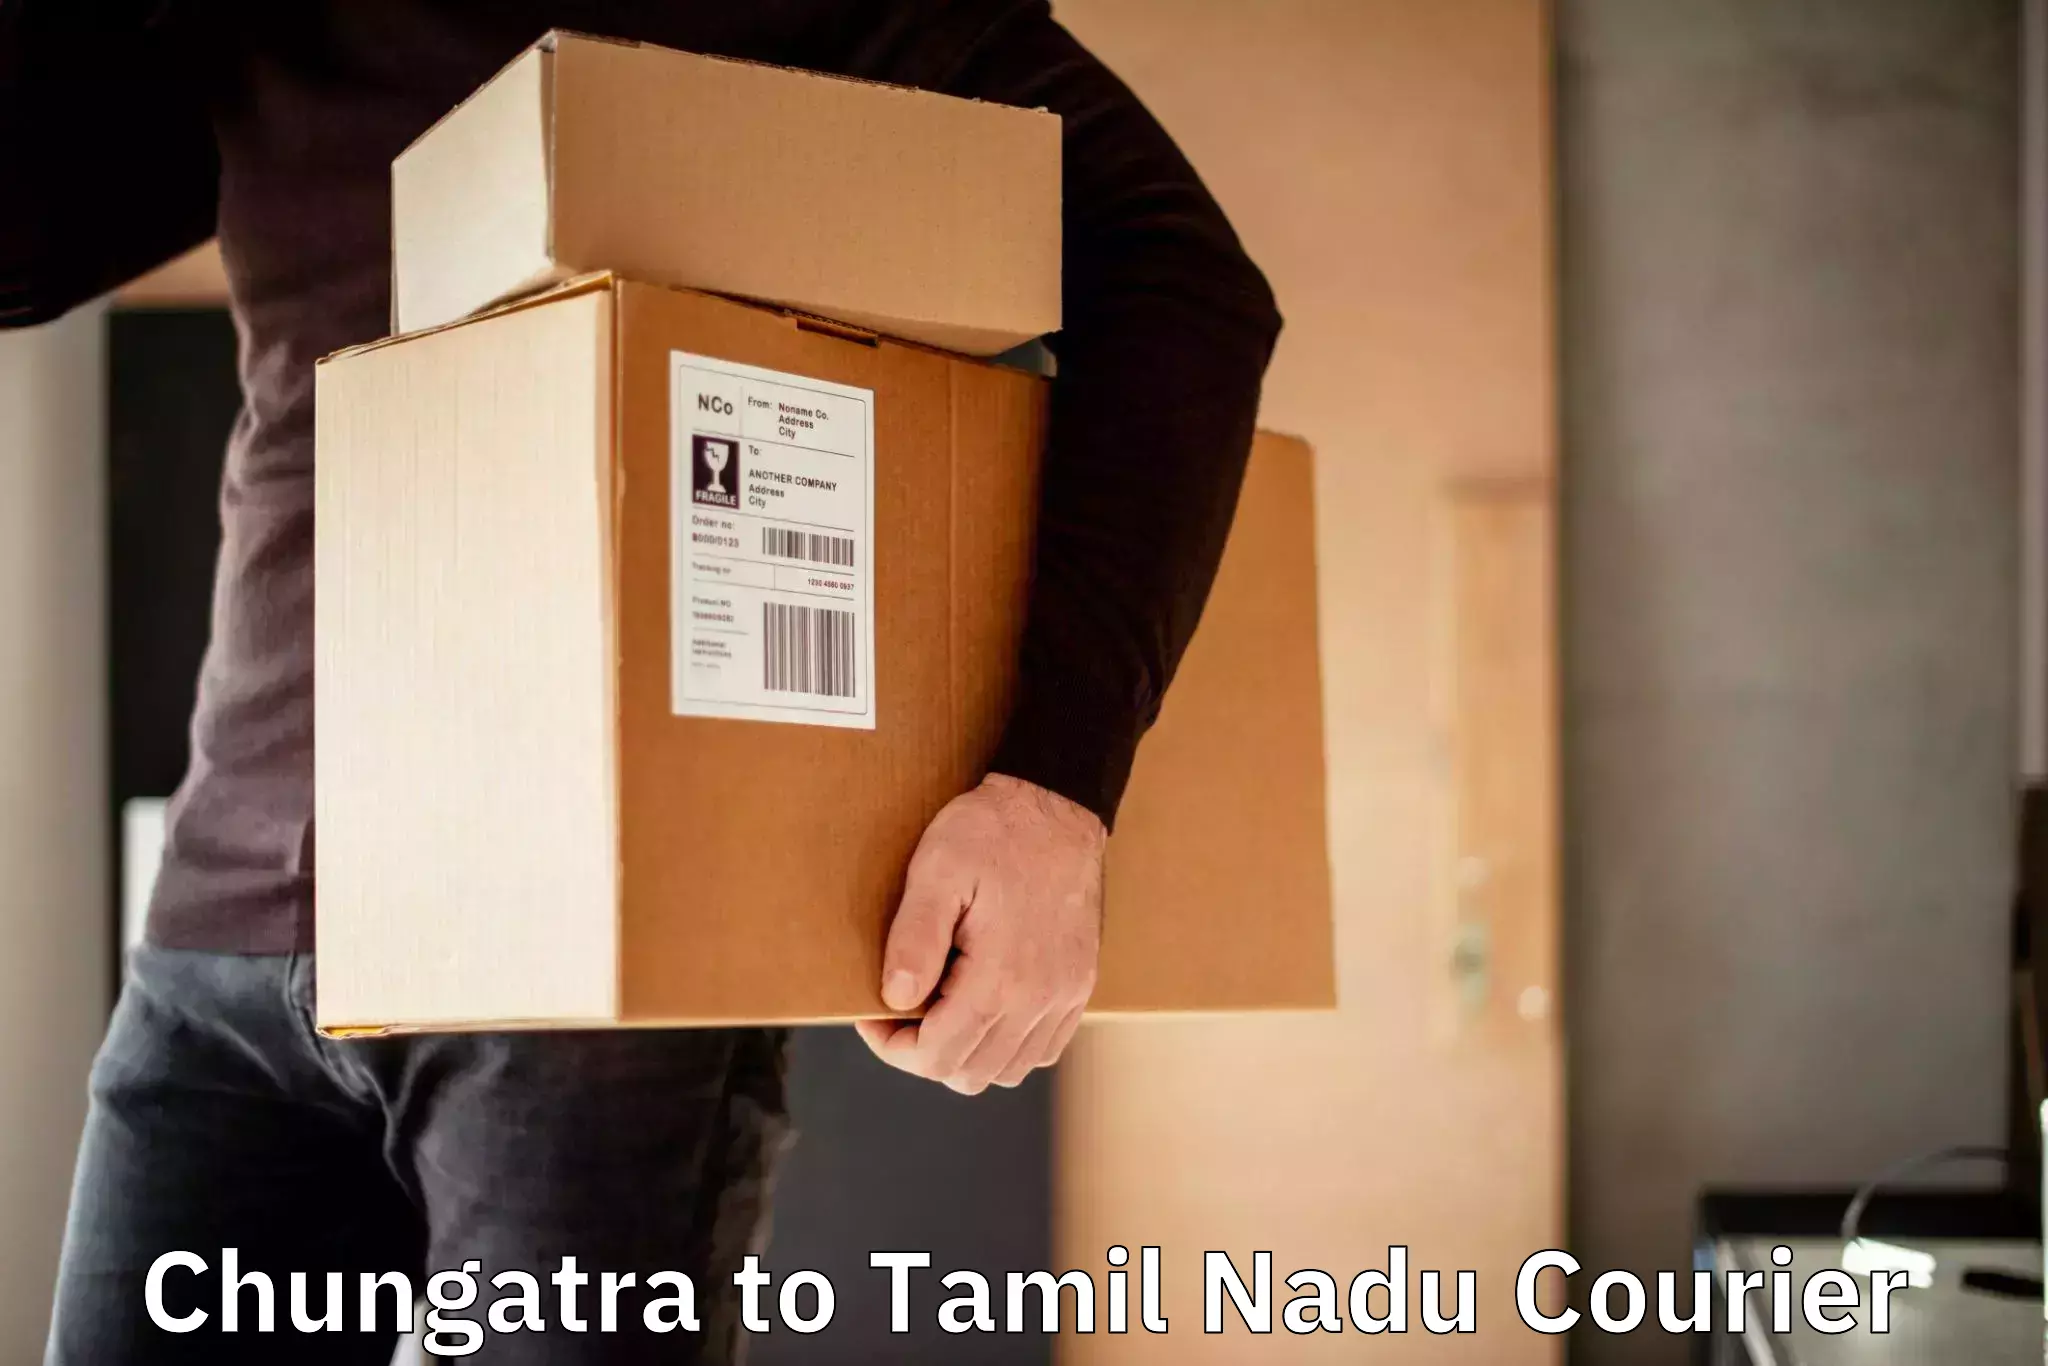 Global courier networks Chungatra to Tuticorin Port